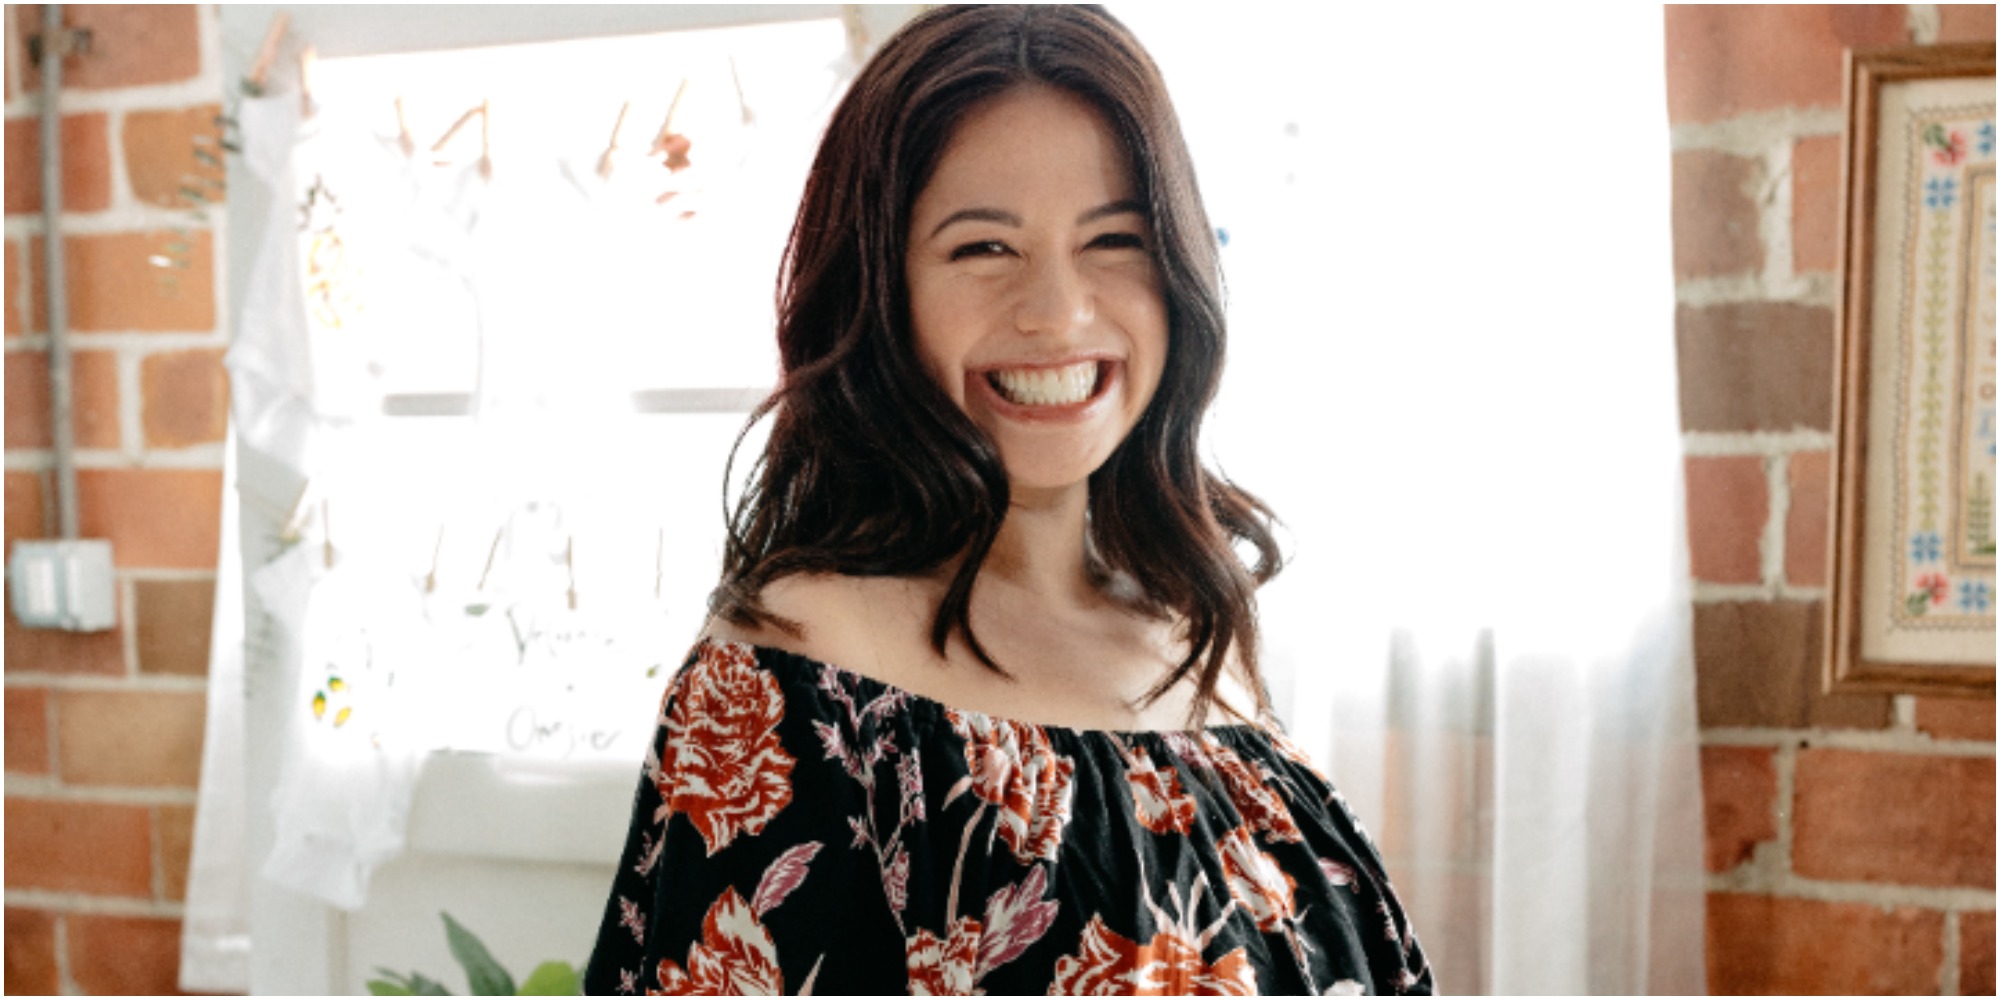 Molly Yeh wears a black dress with colored flowers in a promotional photo.